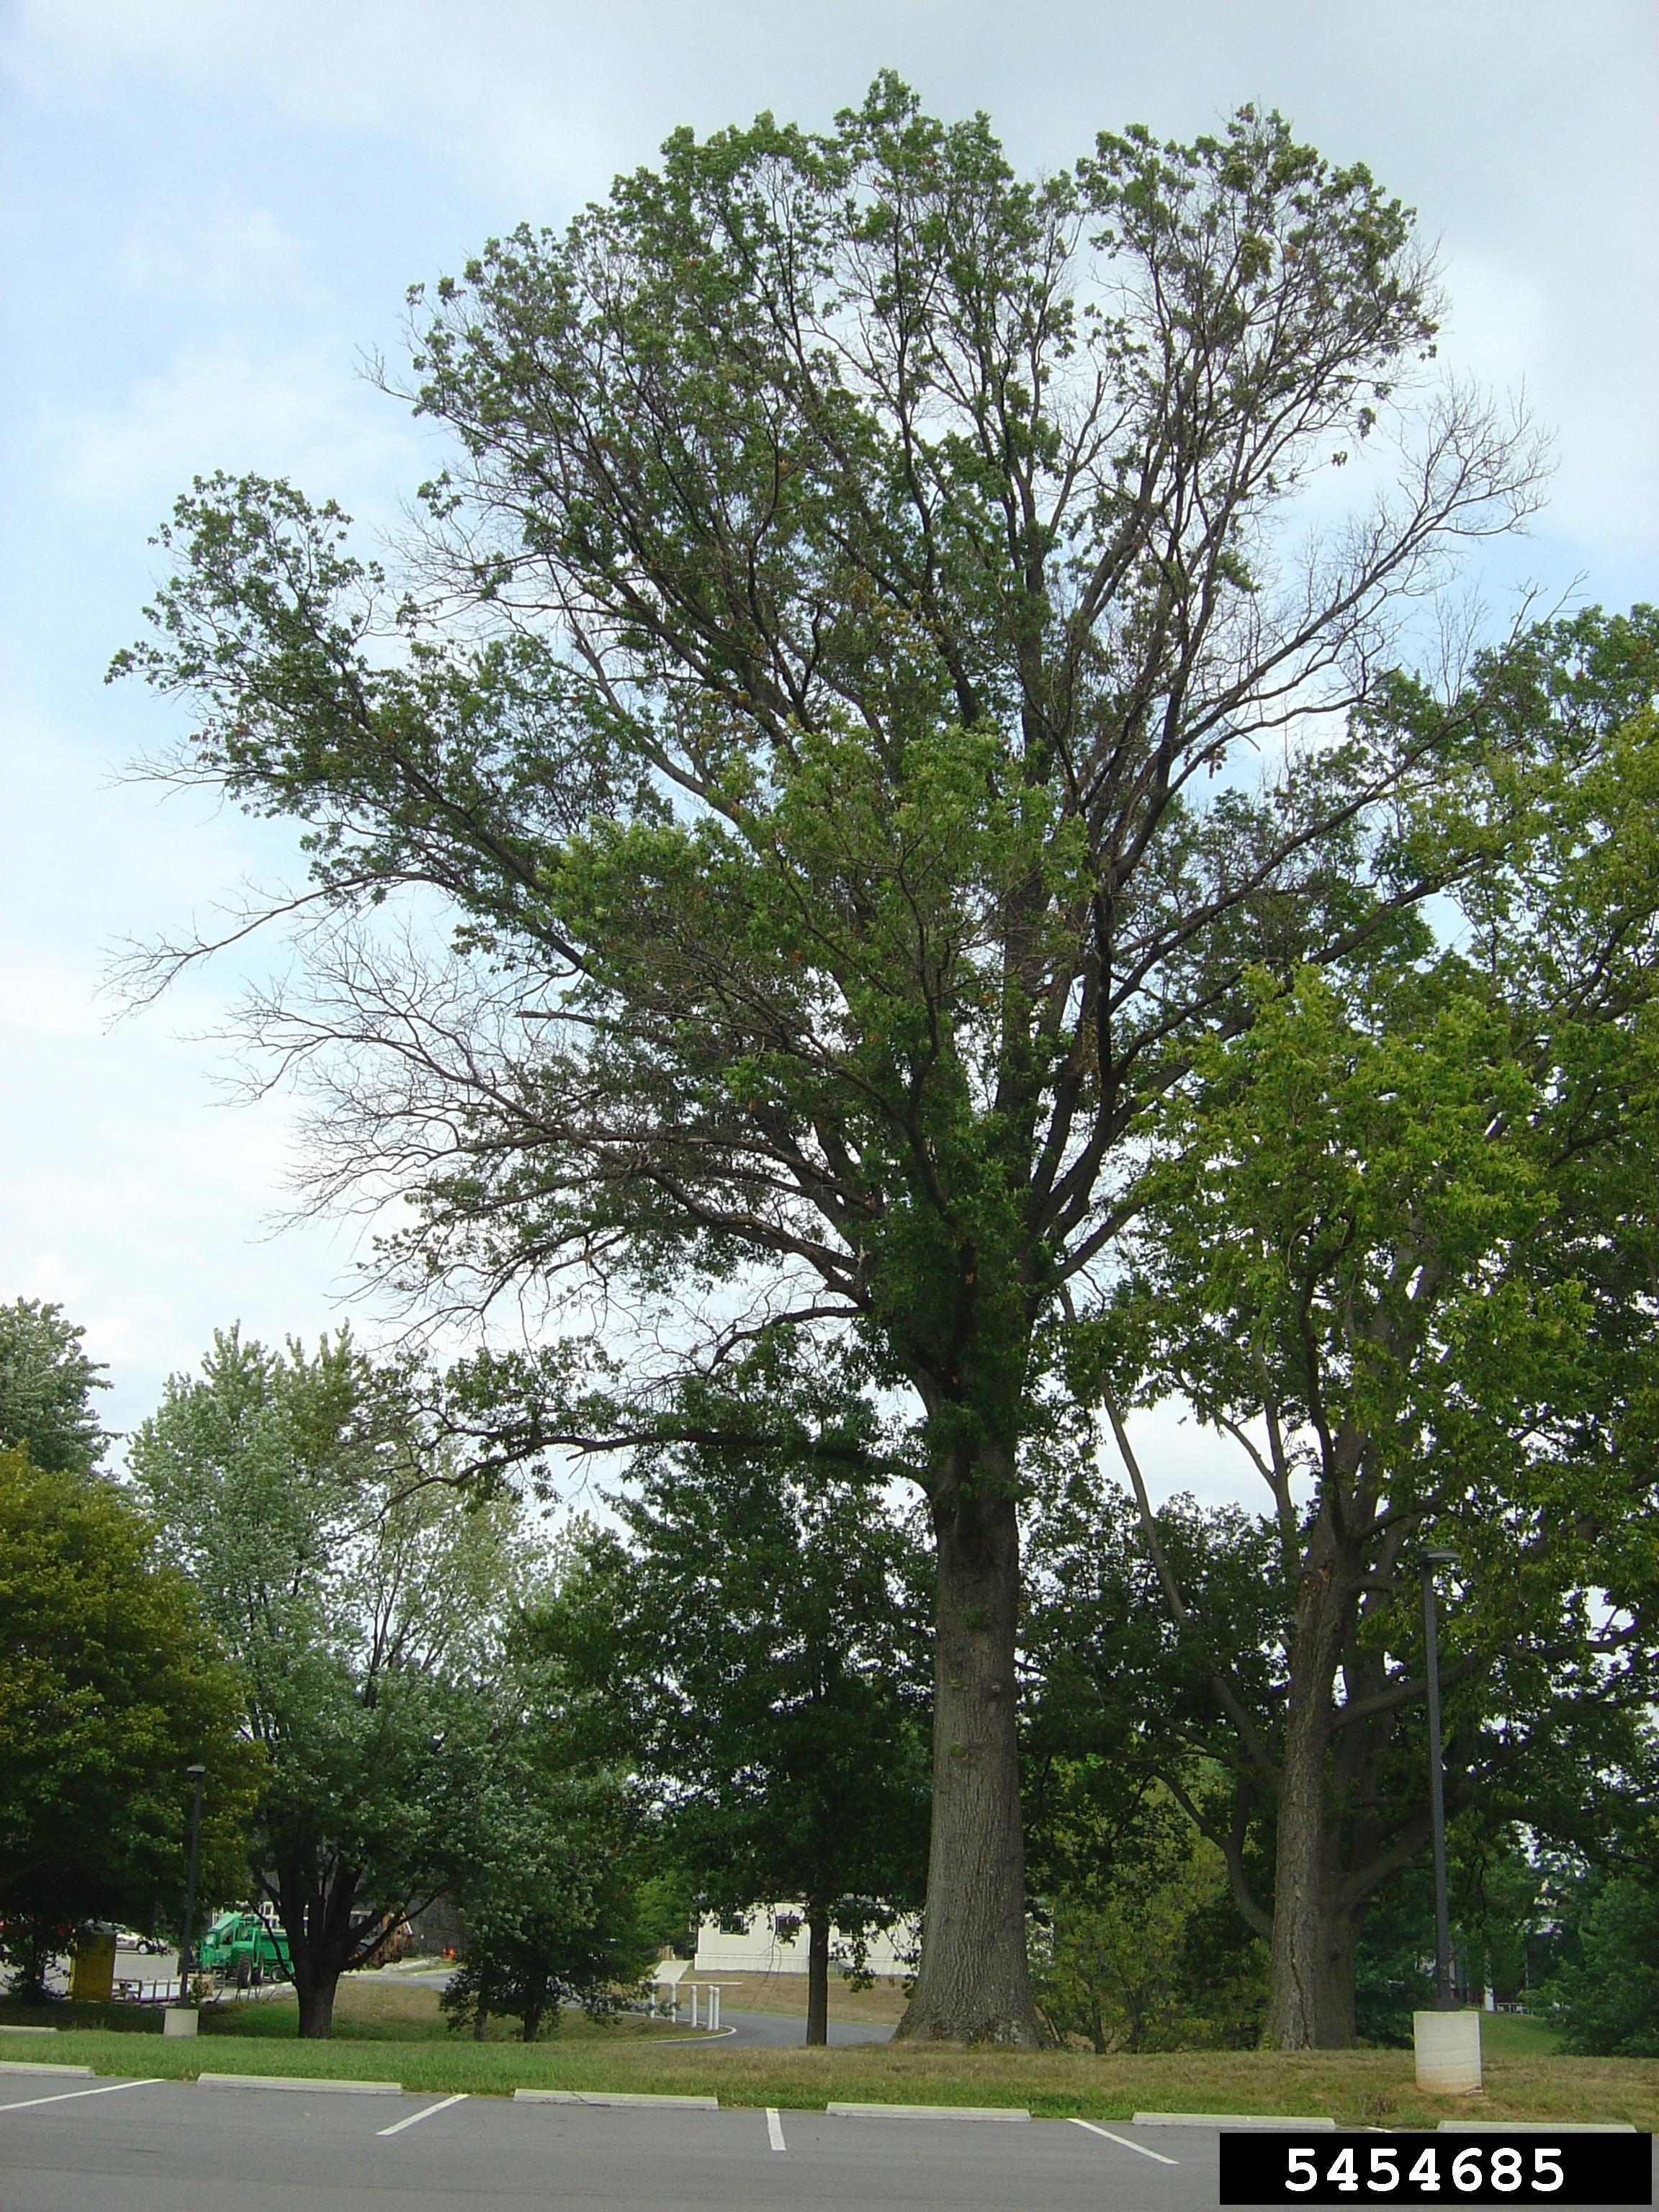 A large oak tree with canopy dieback.